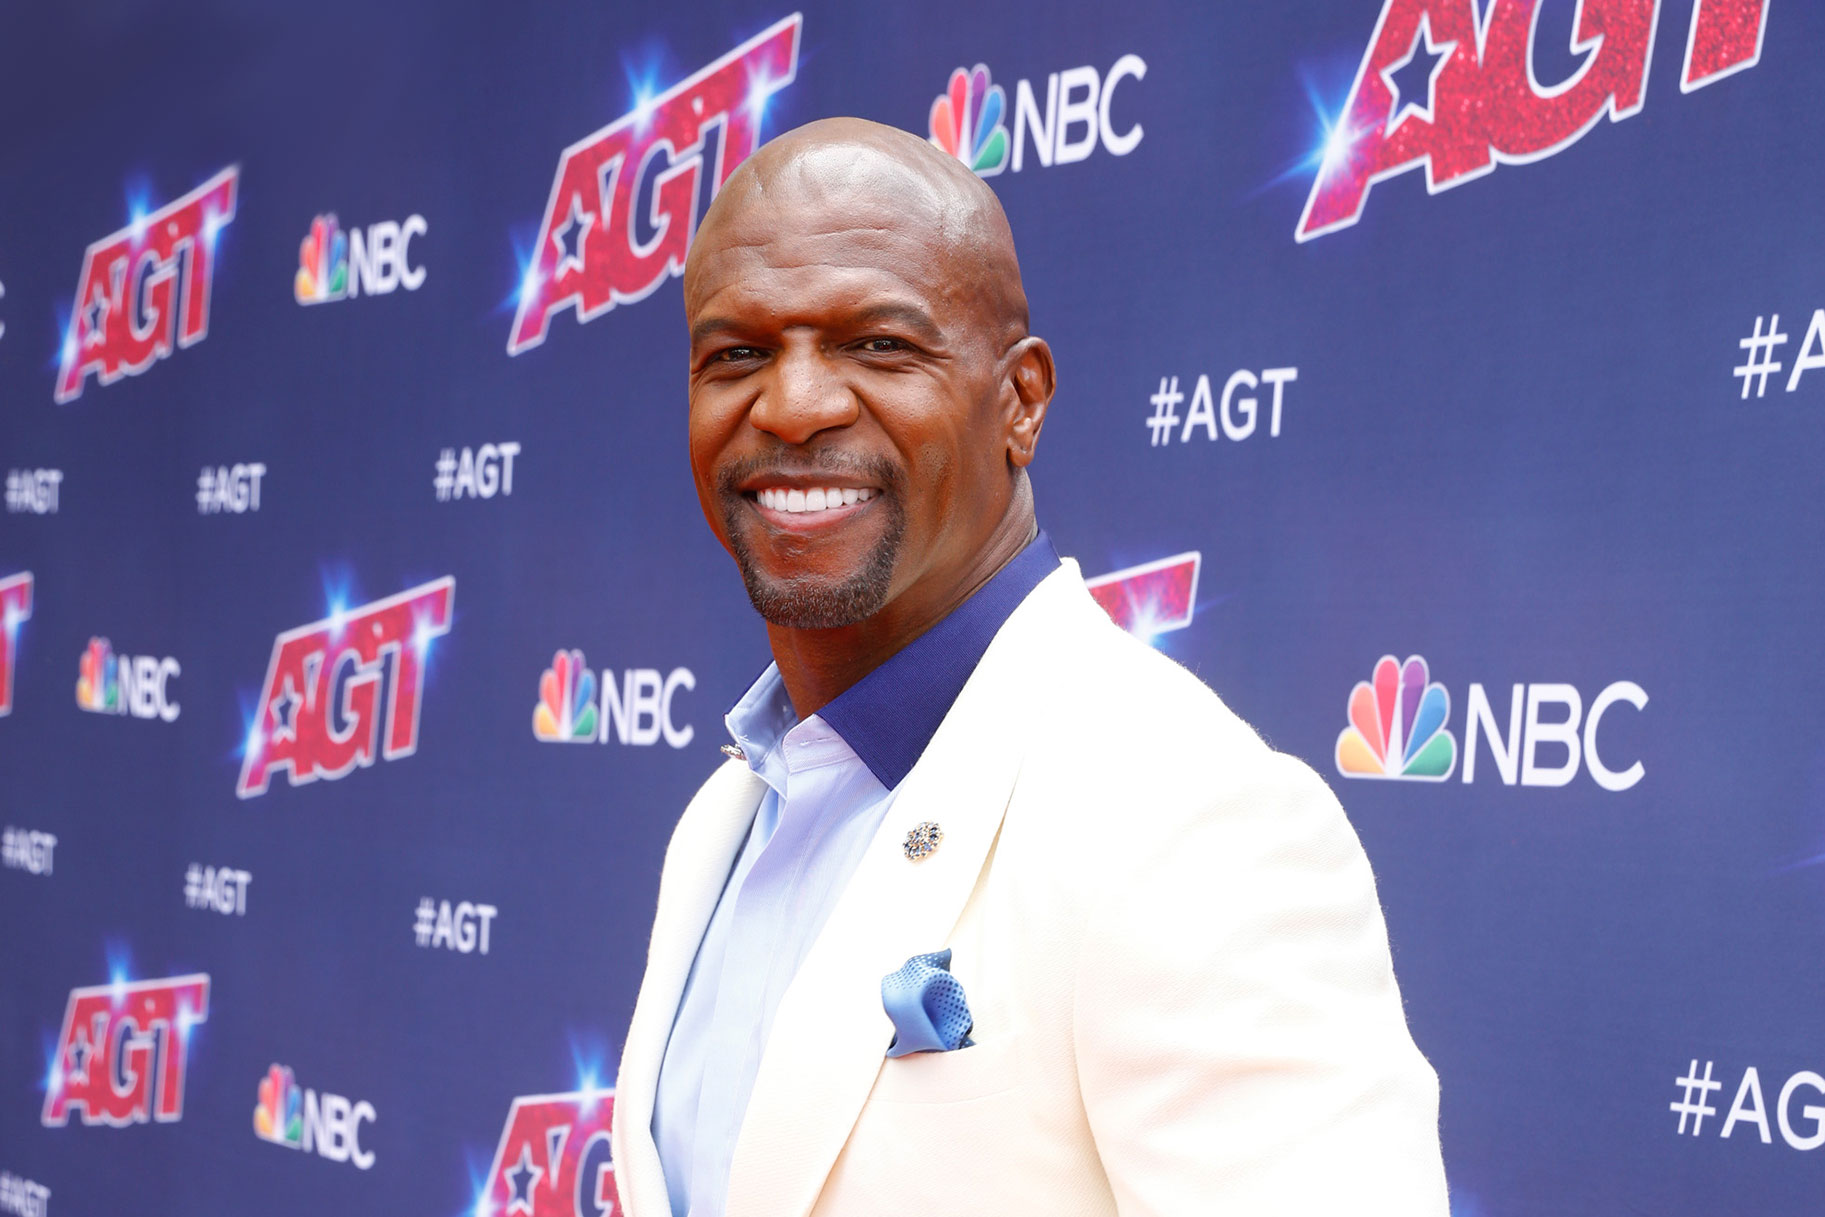 Terry Crews walking the America's Got Talent red carpet in a white suit